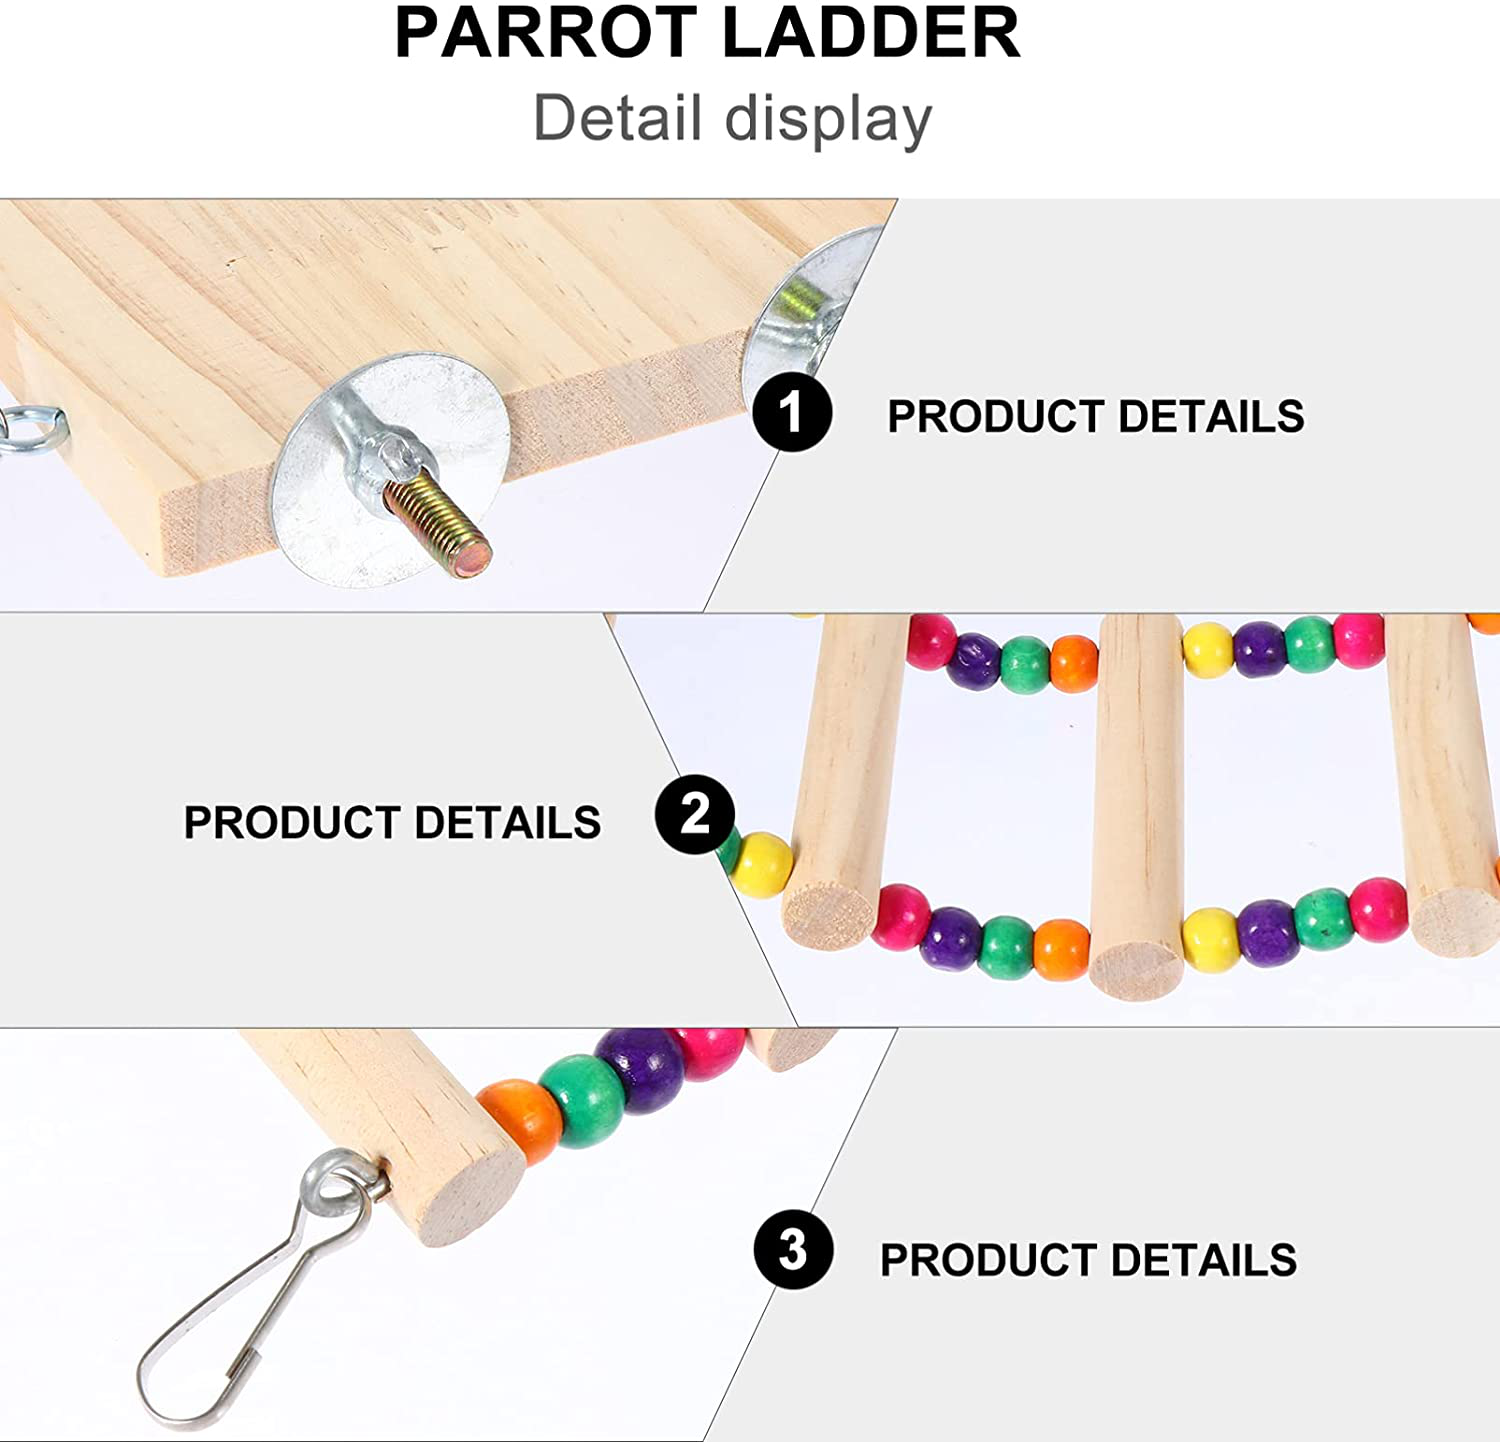 NUOBESTY Bird Ladder Perch Wood Parrot Bird Perch Stand Platform with Swing Bridge for Pet Training Playing Flexible Birds Cage Accessories